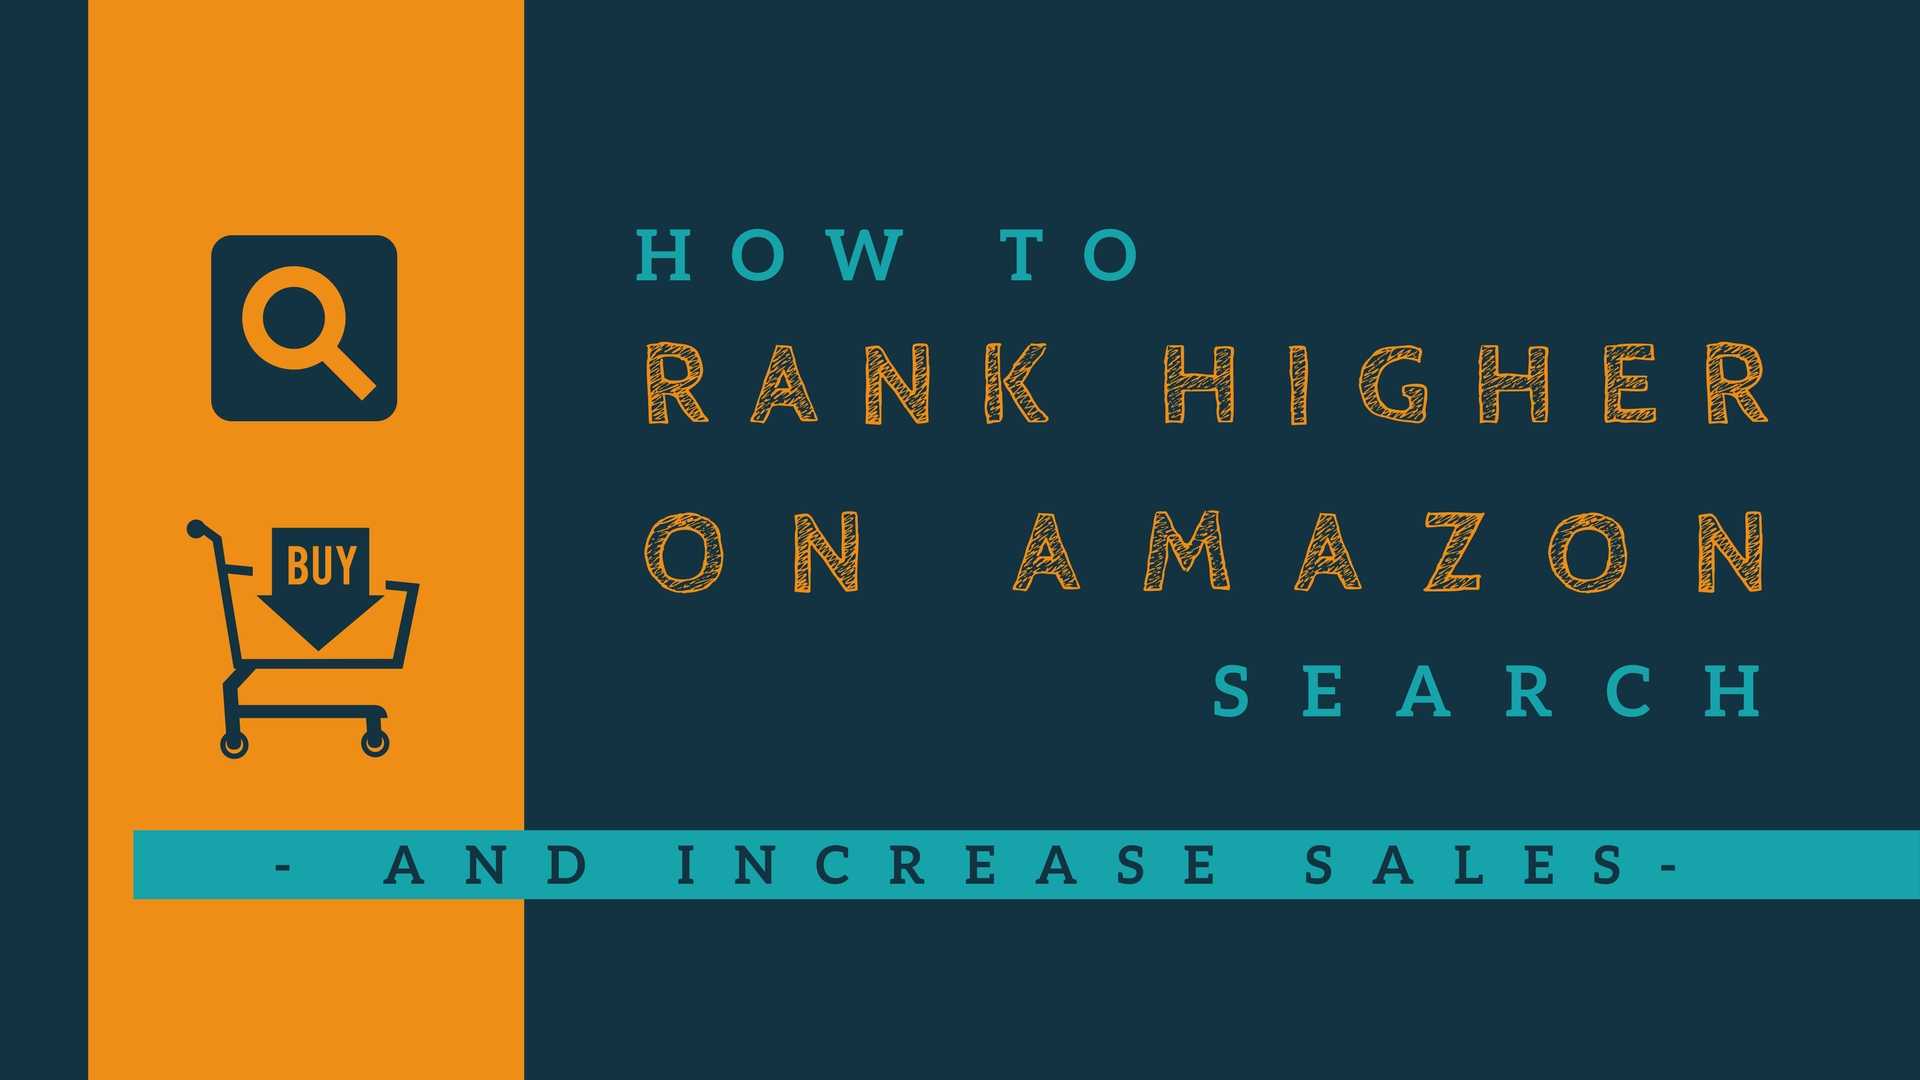 How to Rank Higher on Amazon Search (And Increase Sales)